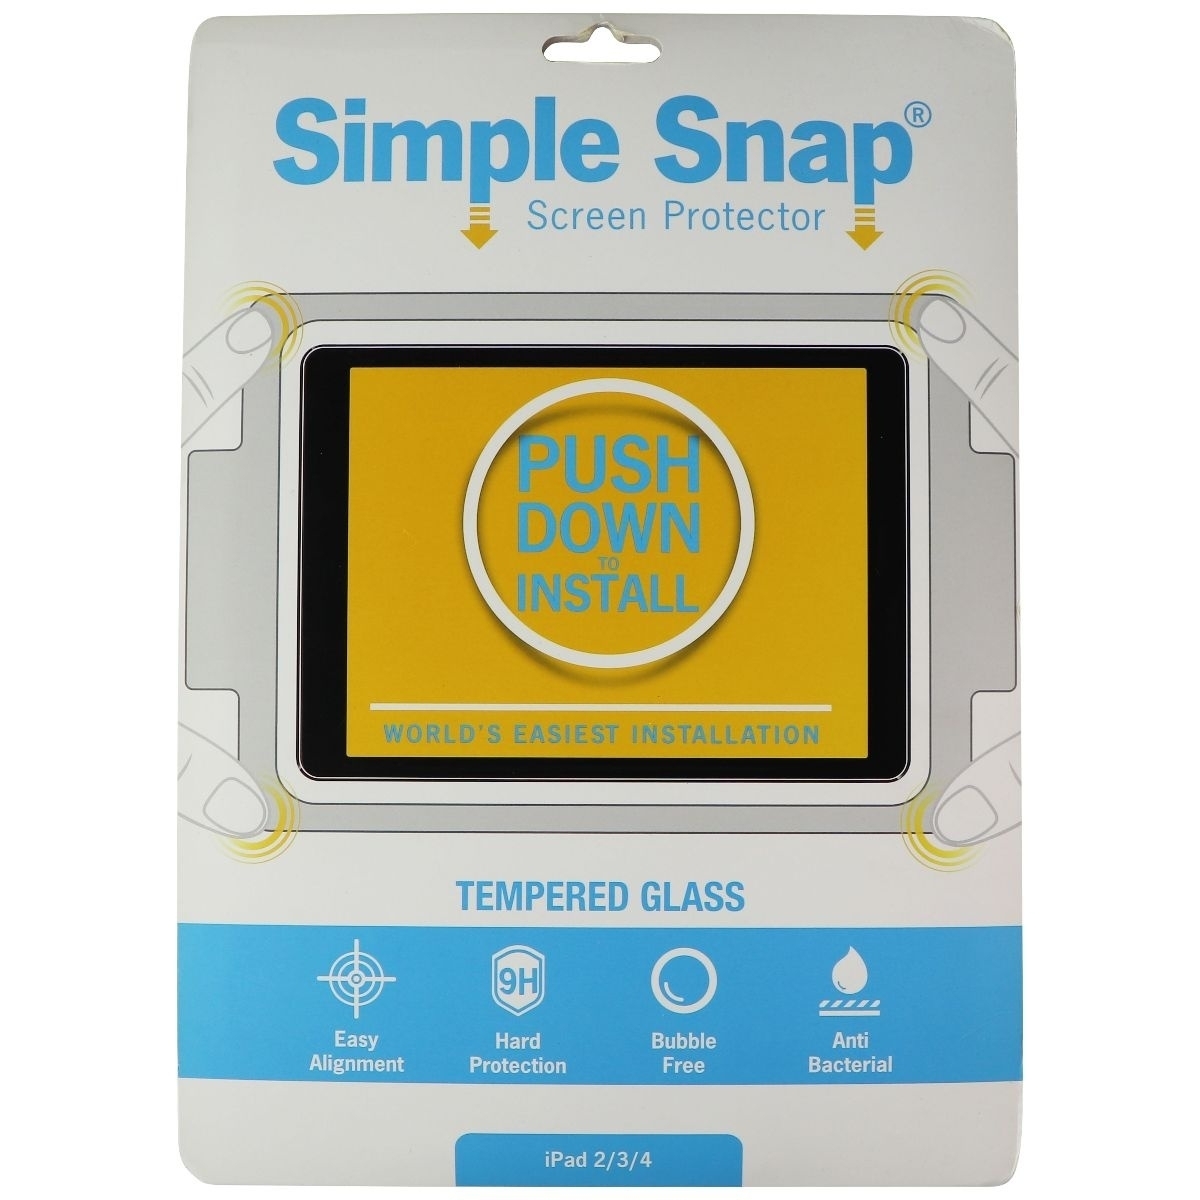 Simple Snap Tempered Glass Screen Protector For Apple IPad 4th/3rd/2nd Gen